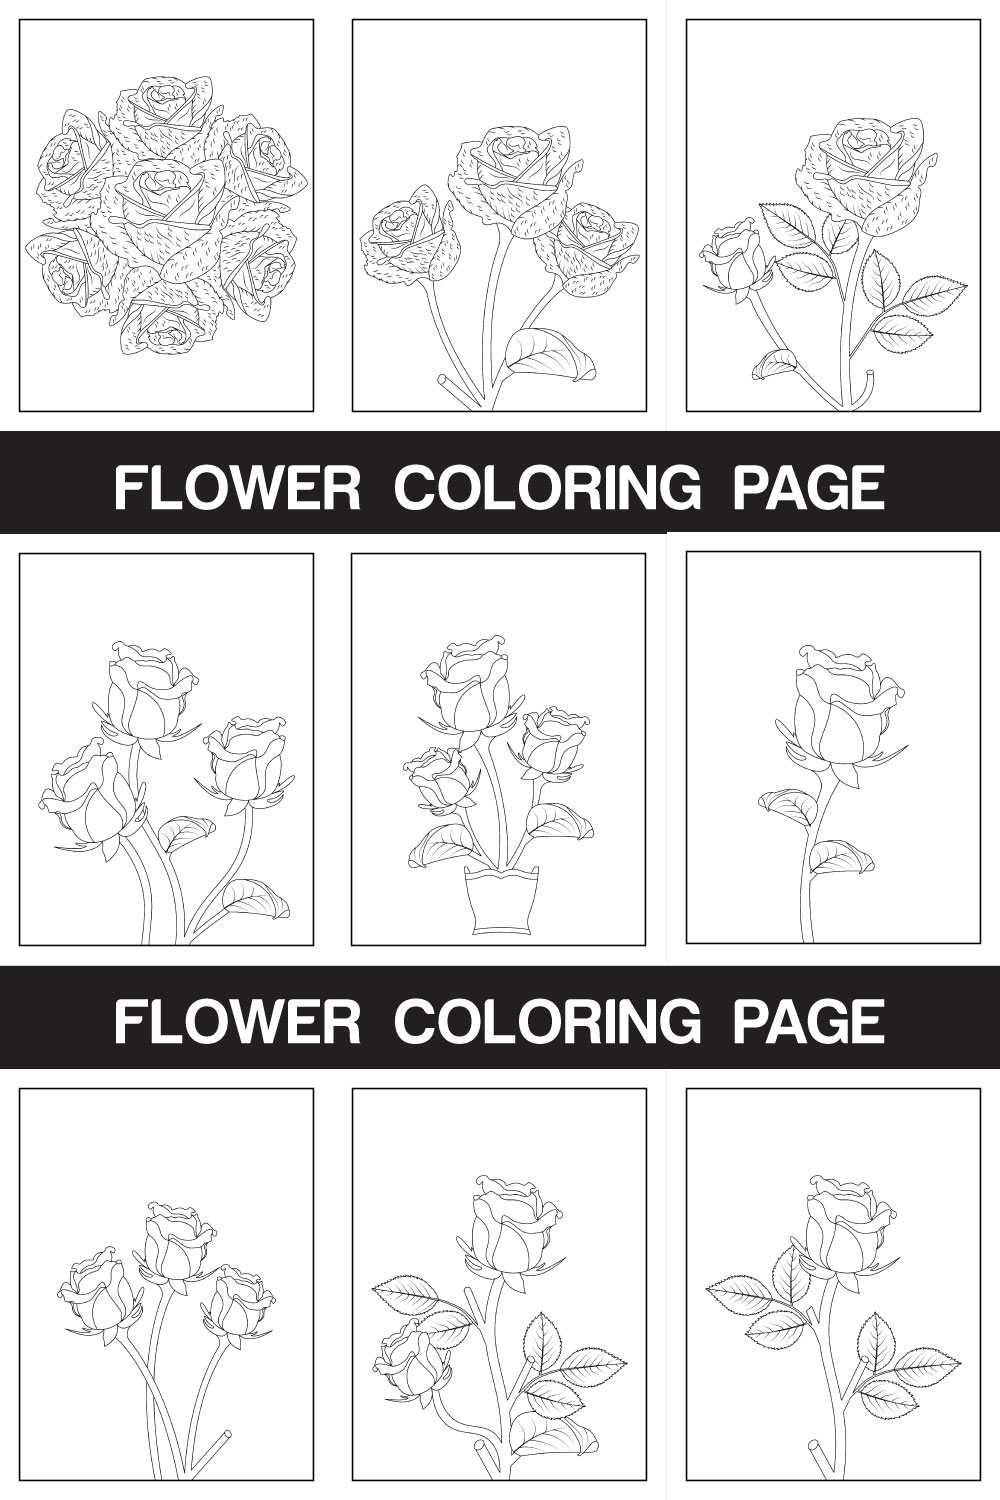 Rose Flower Coloring Page And Book Hand Drawn Line Art illustration pinterest preview image.